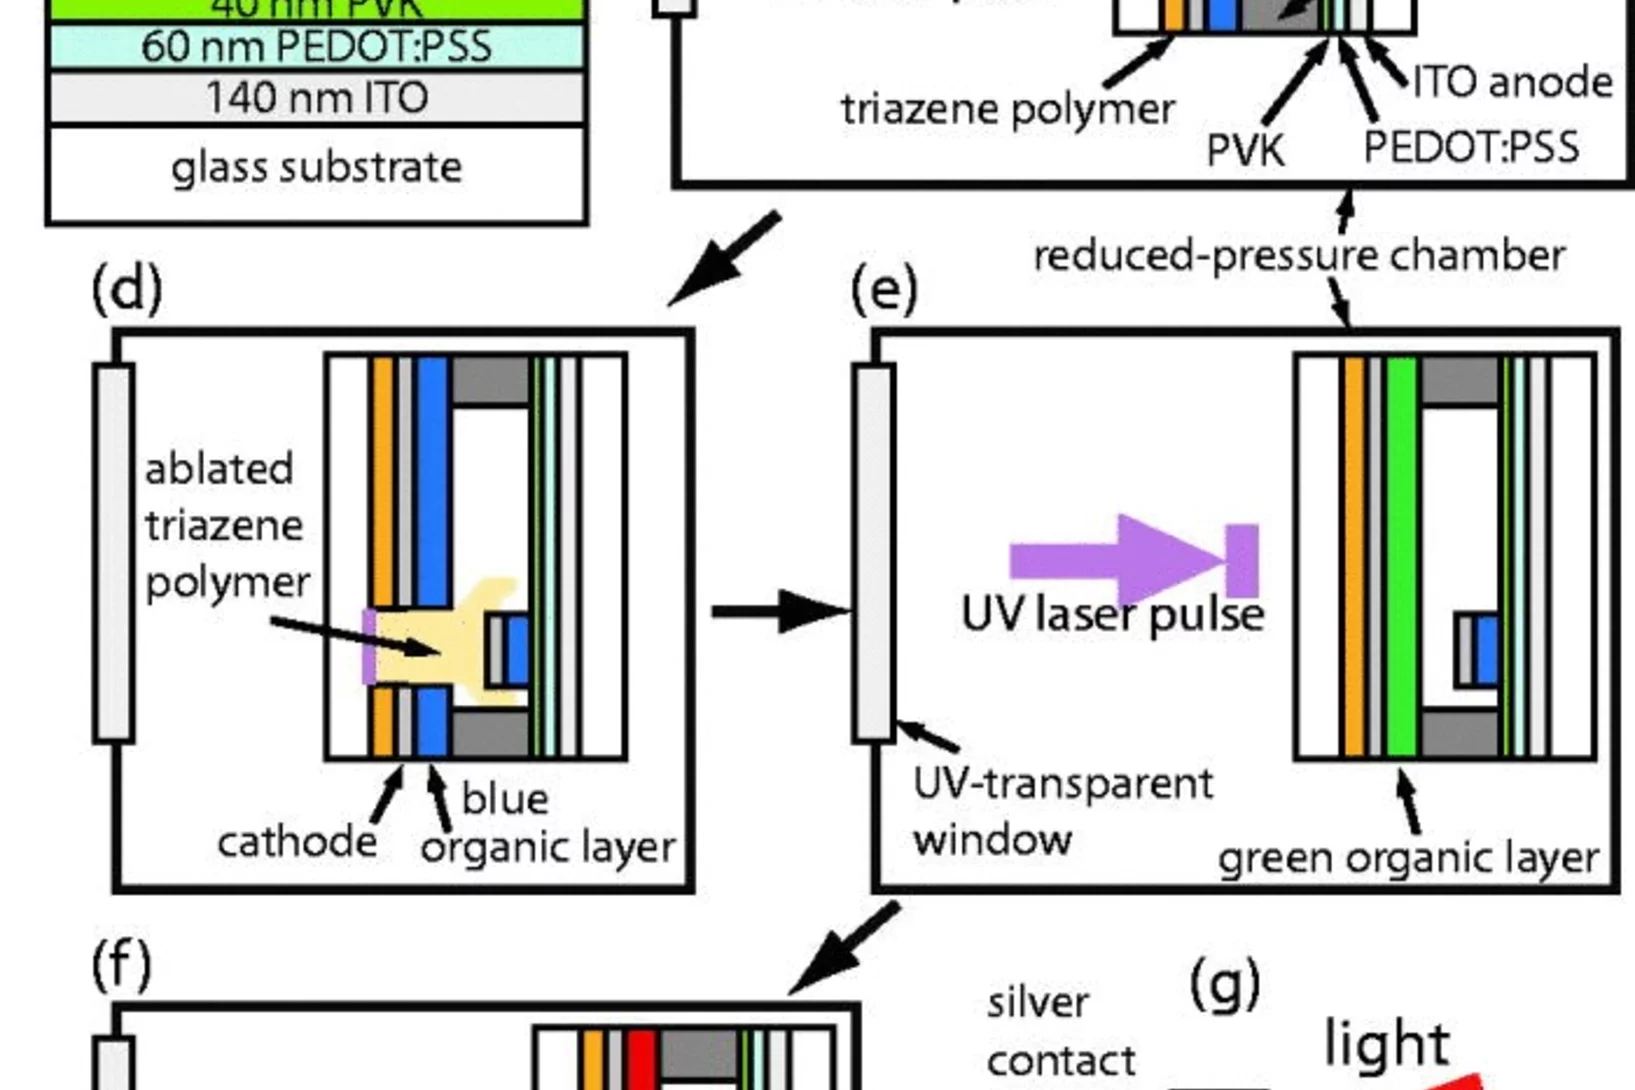 Summary of the LIFT process for tri-color OLED pixels. The 1-D substrate architecture is shown for the LIFT donor substrate (a) and the receiver substrate (b). The transfer of the first OLED color, blue, is shown in detail with the laser beam approaching (c) and the TP ablation and pixel deposition (d). LIFT of the green (e) and red (f) OLEDs is shown in sequence, and EL operation of the final three colors, side-by-side is also shown (g).